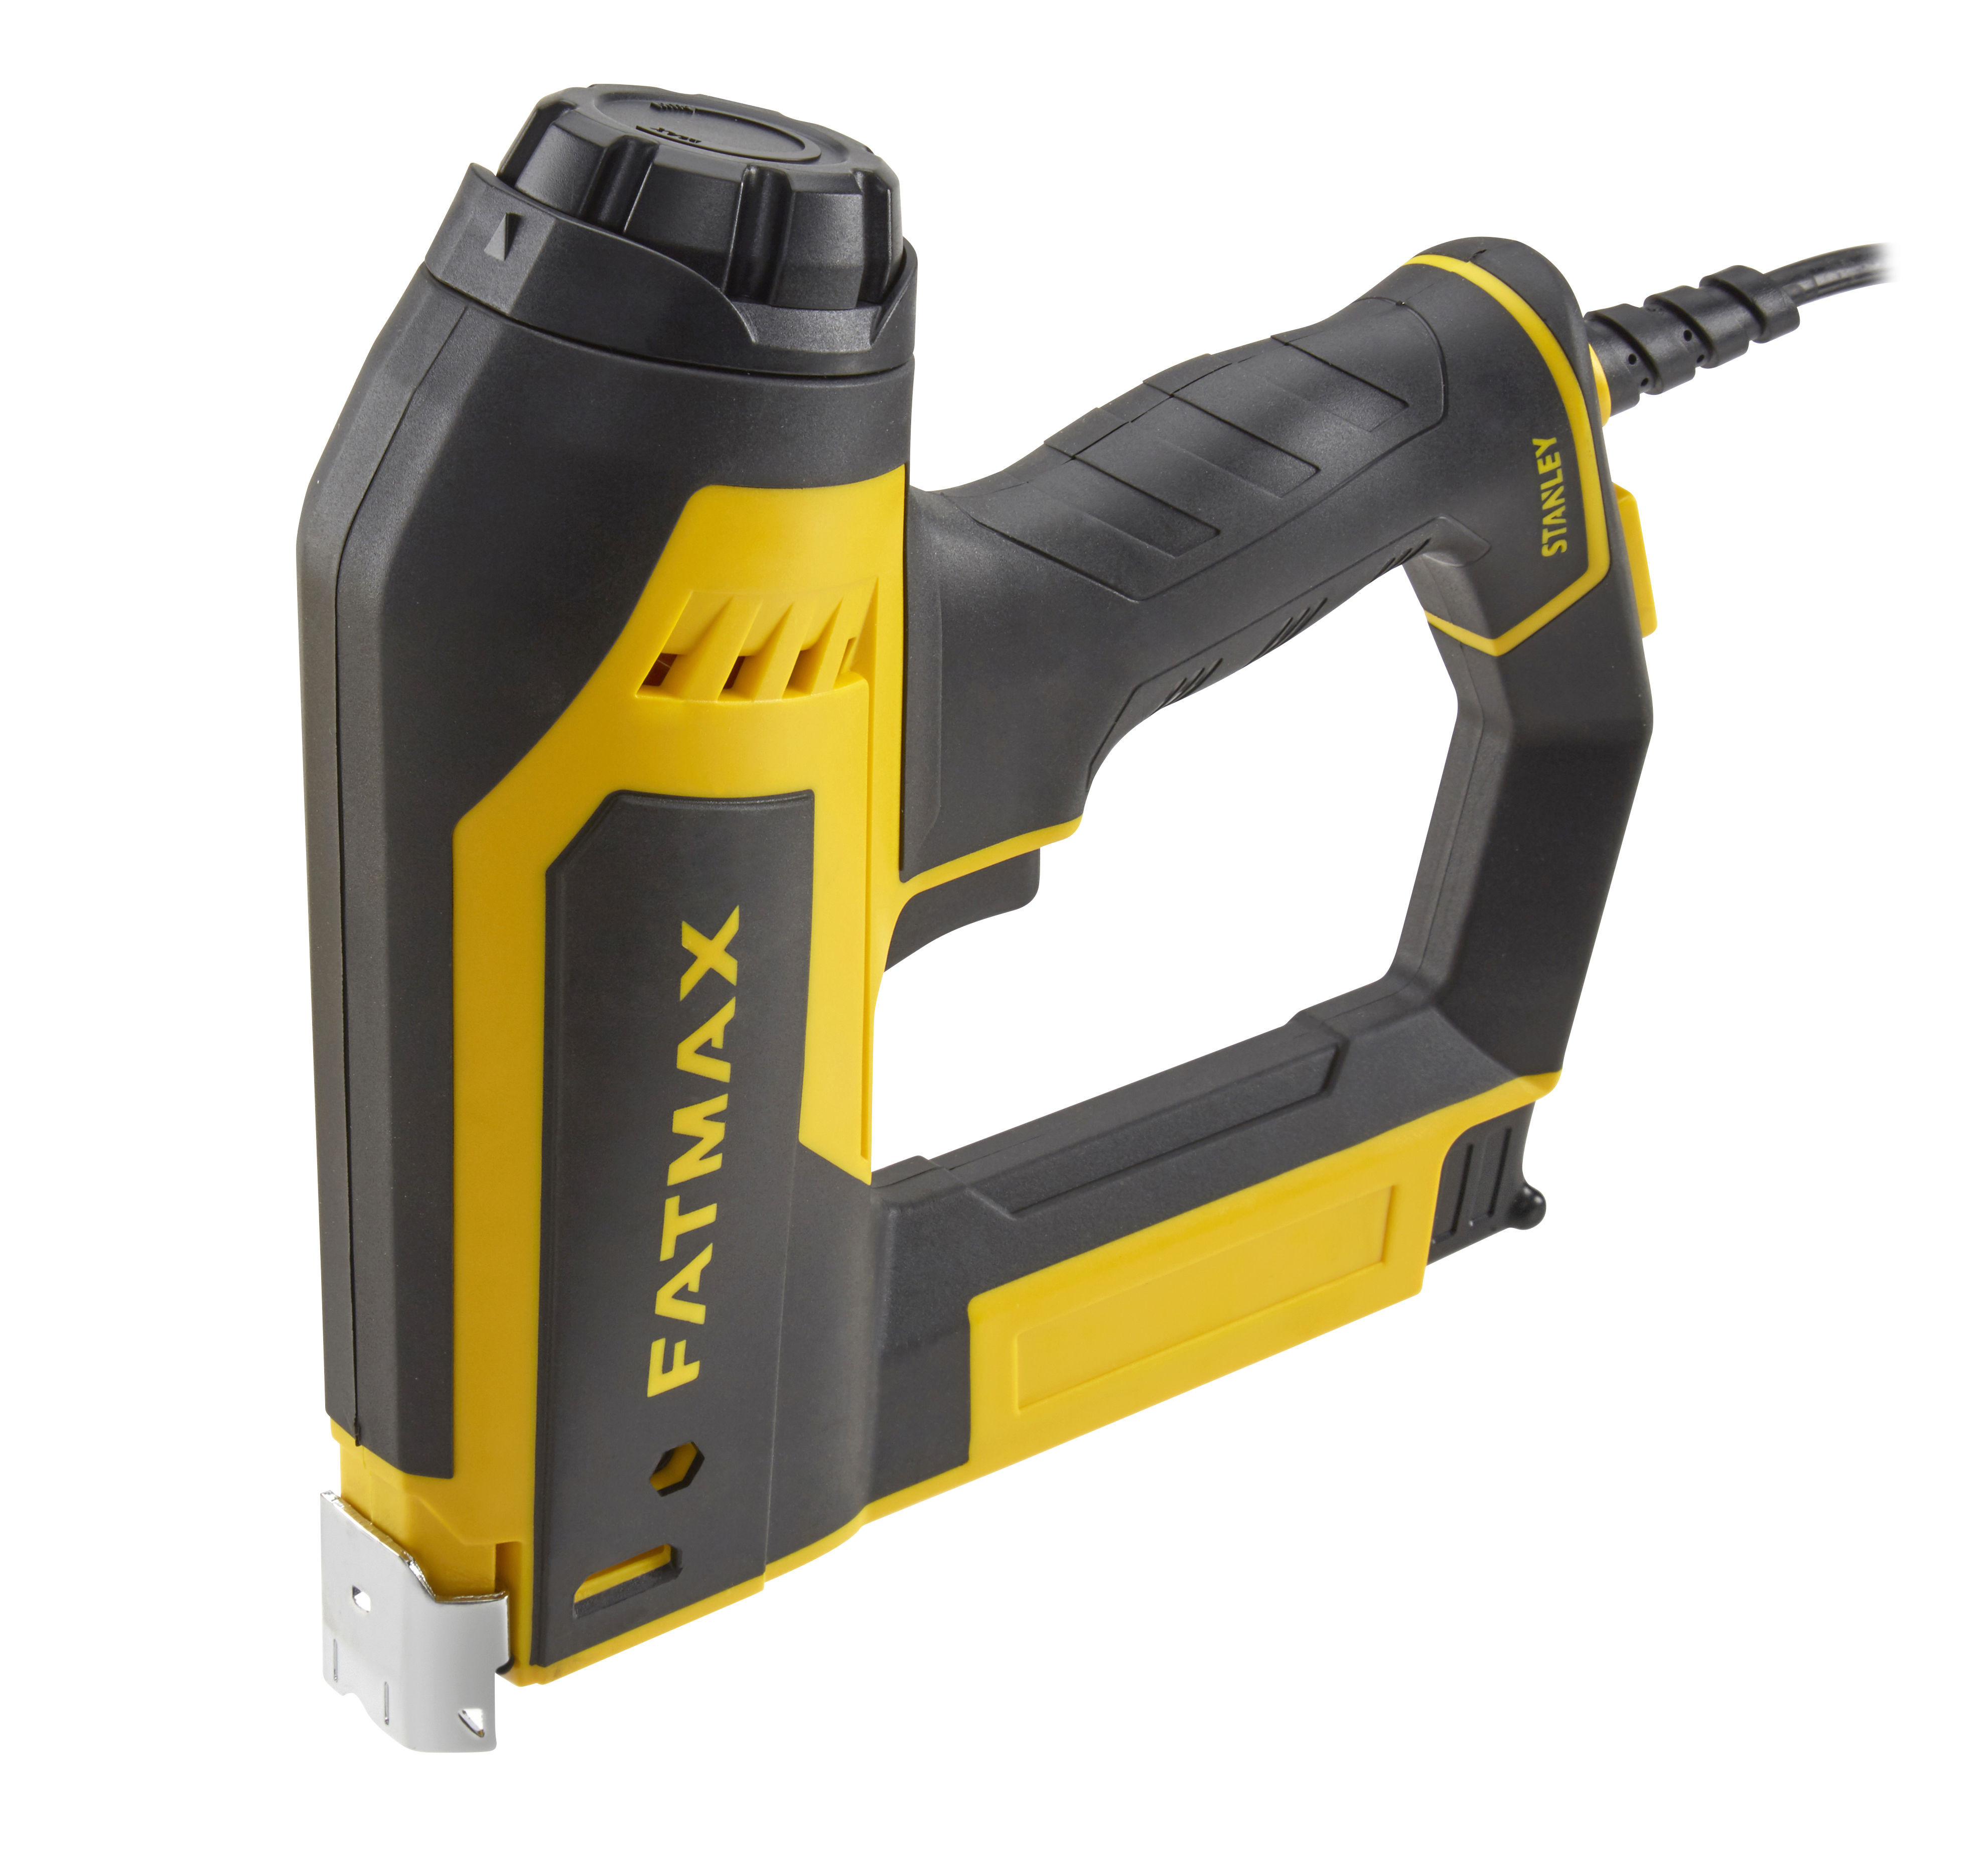 Agrafeuse-Cloueuse Tr 350 Fatmax Stanley 6-TR350 